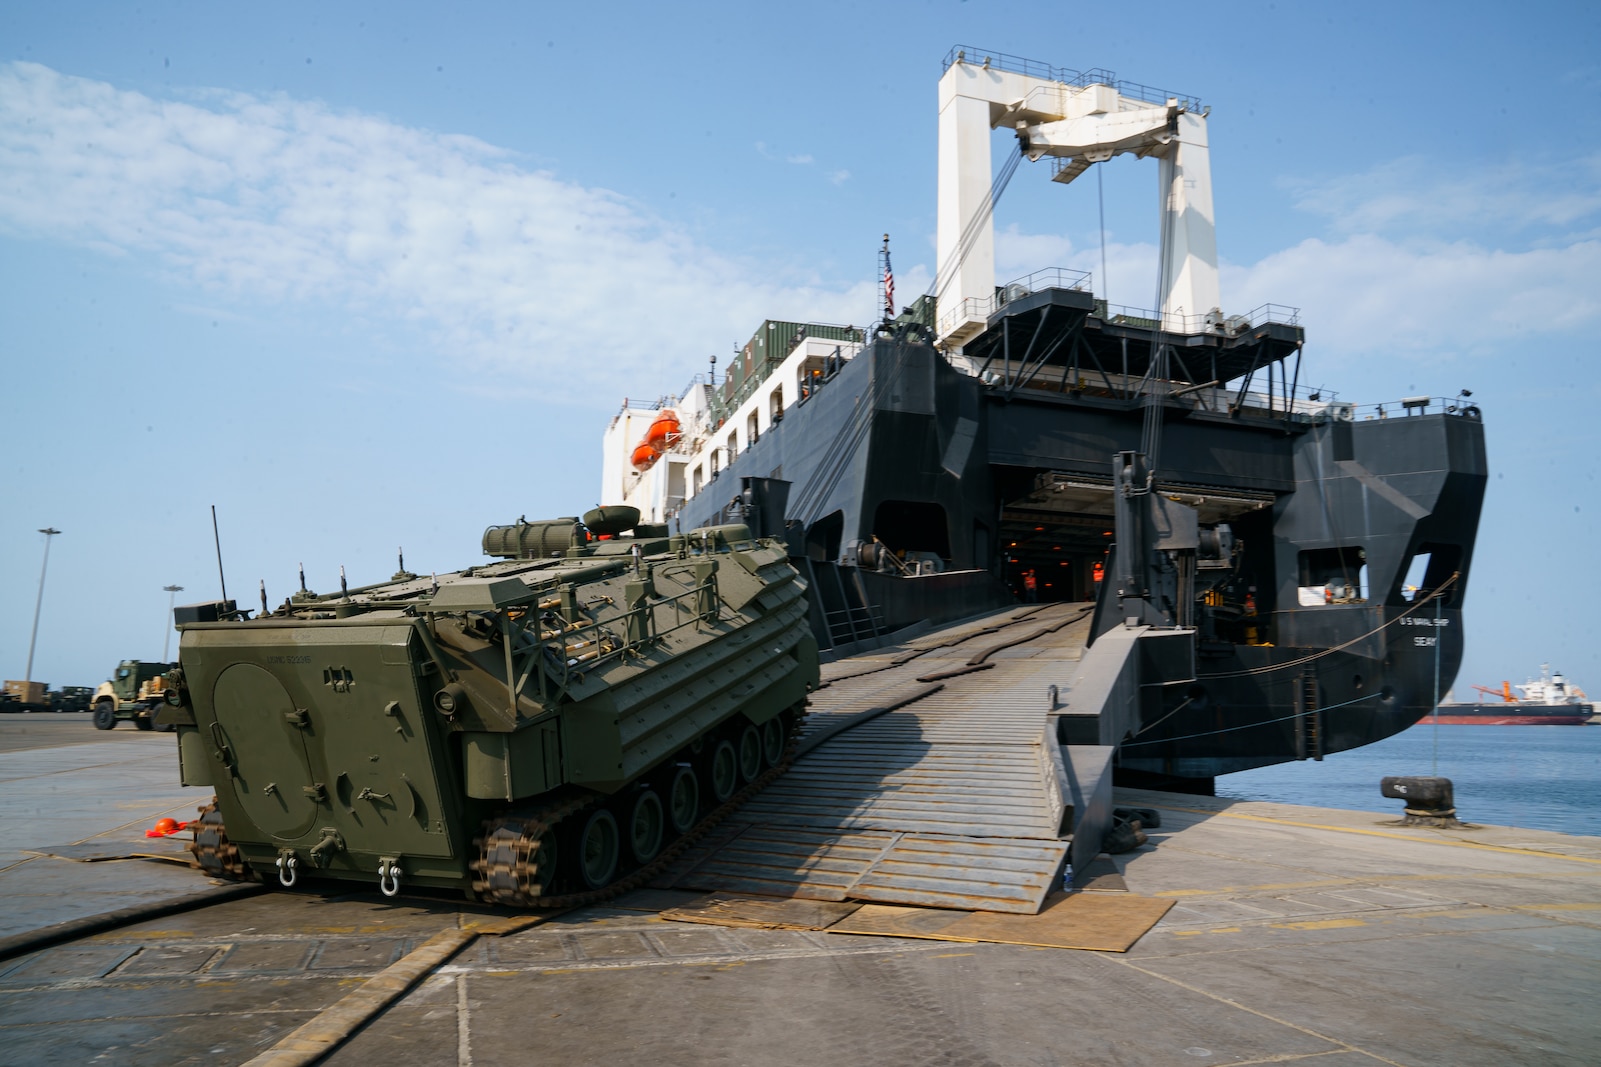 U.S. Marines assigned to Combat Logistics Regiment 1, 1st Marine Logistics Group, load an A1 Assault Amphibious Vehicle (AAV-P7) onto the USNS Seay (T-AKR-302) during exercise Native Fury 22 at the Yanbu Commercial Port, Kingdom of Saudi Arabia